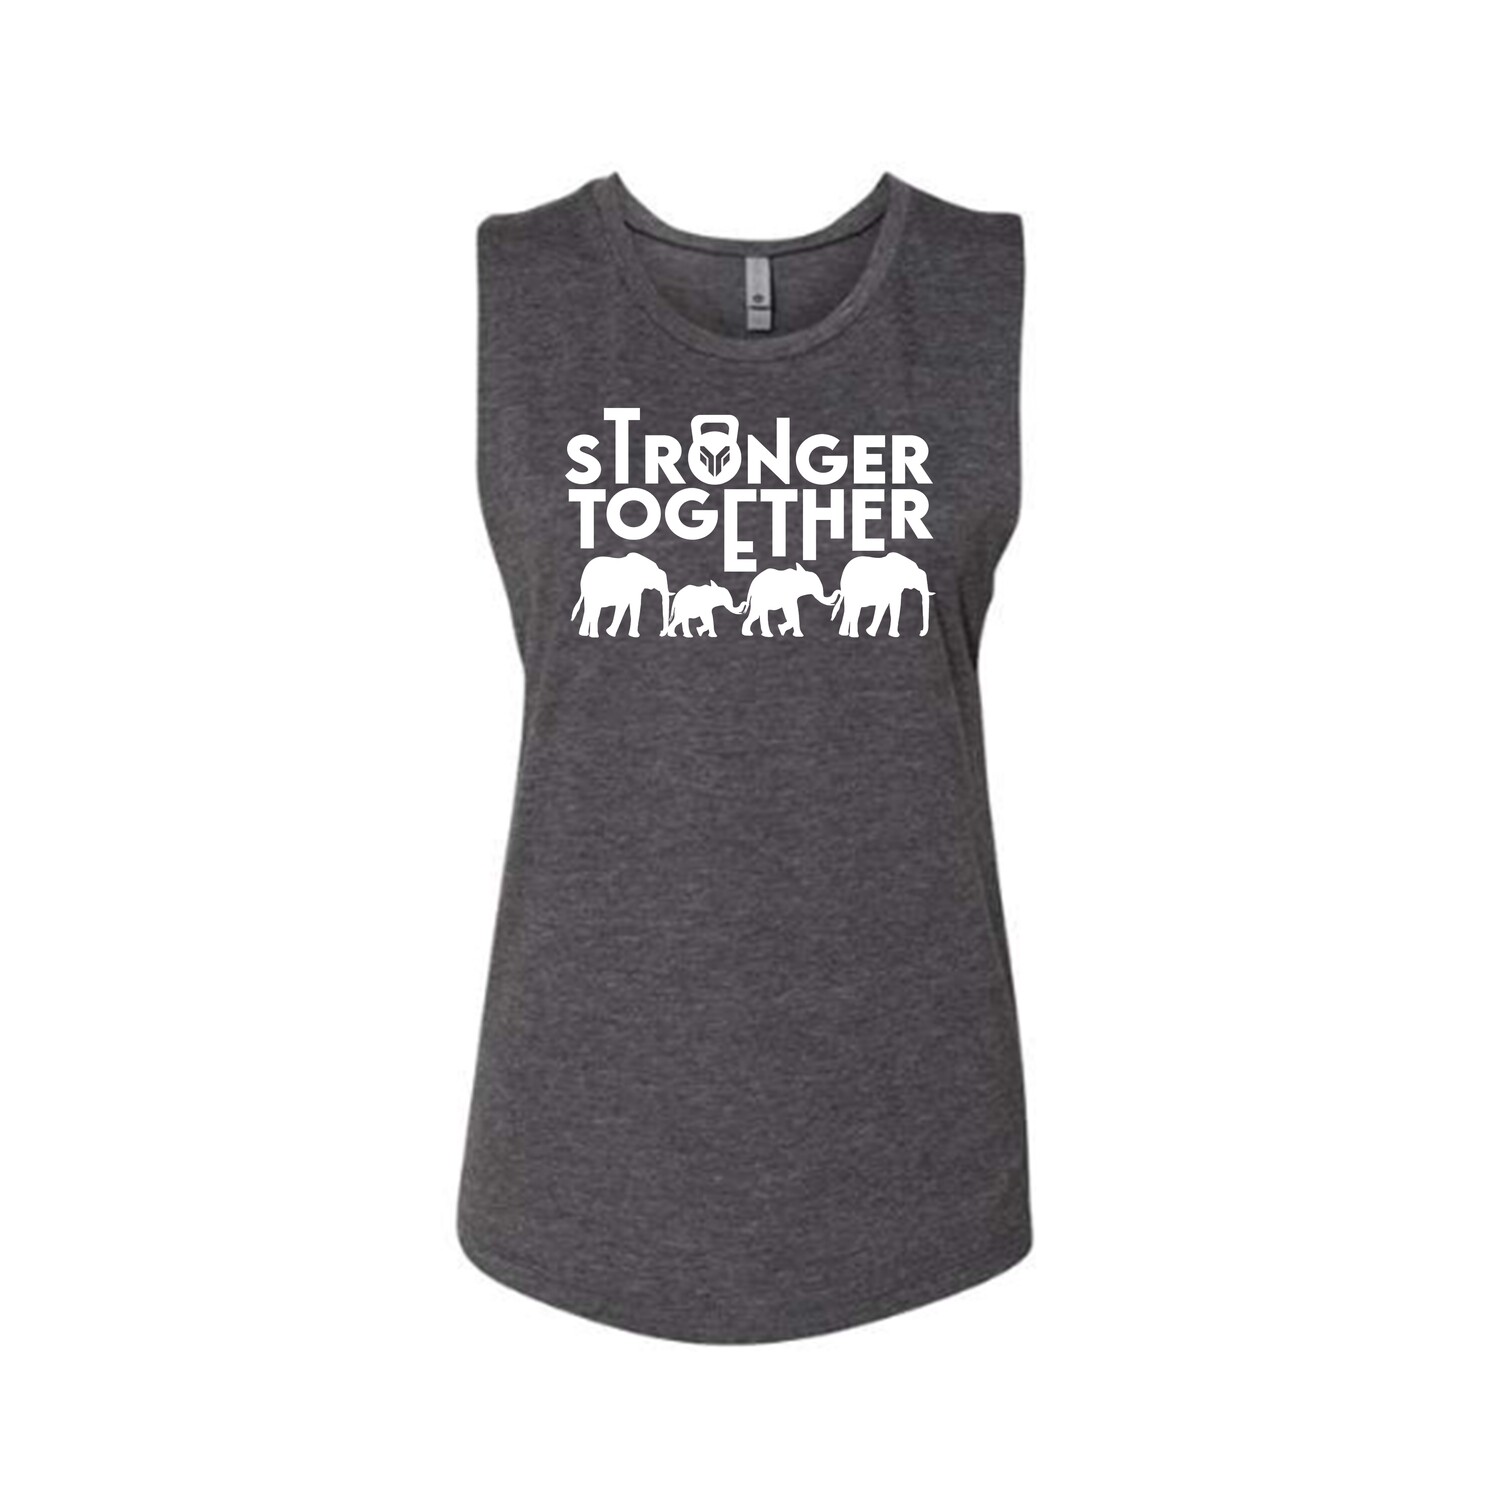 Stronger Together Women's Tank